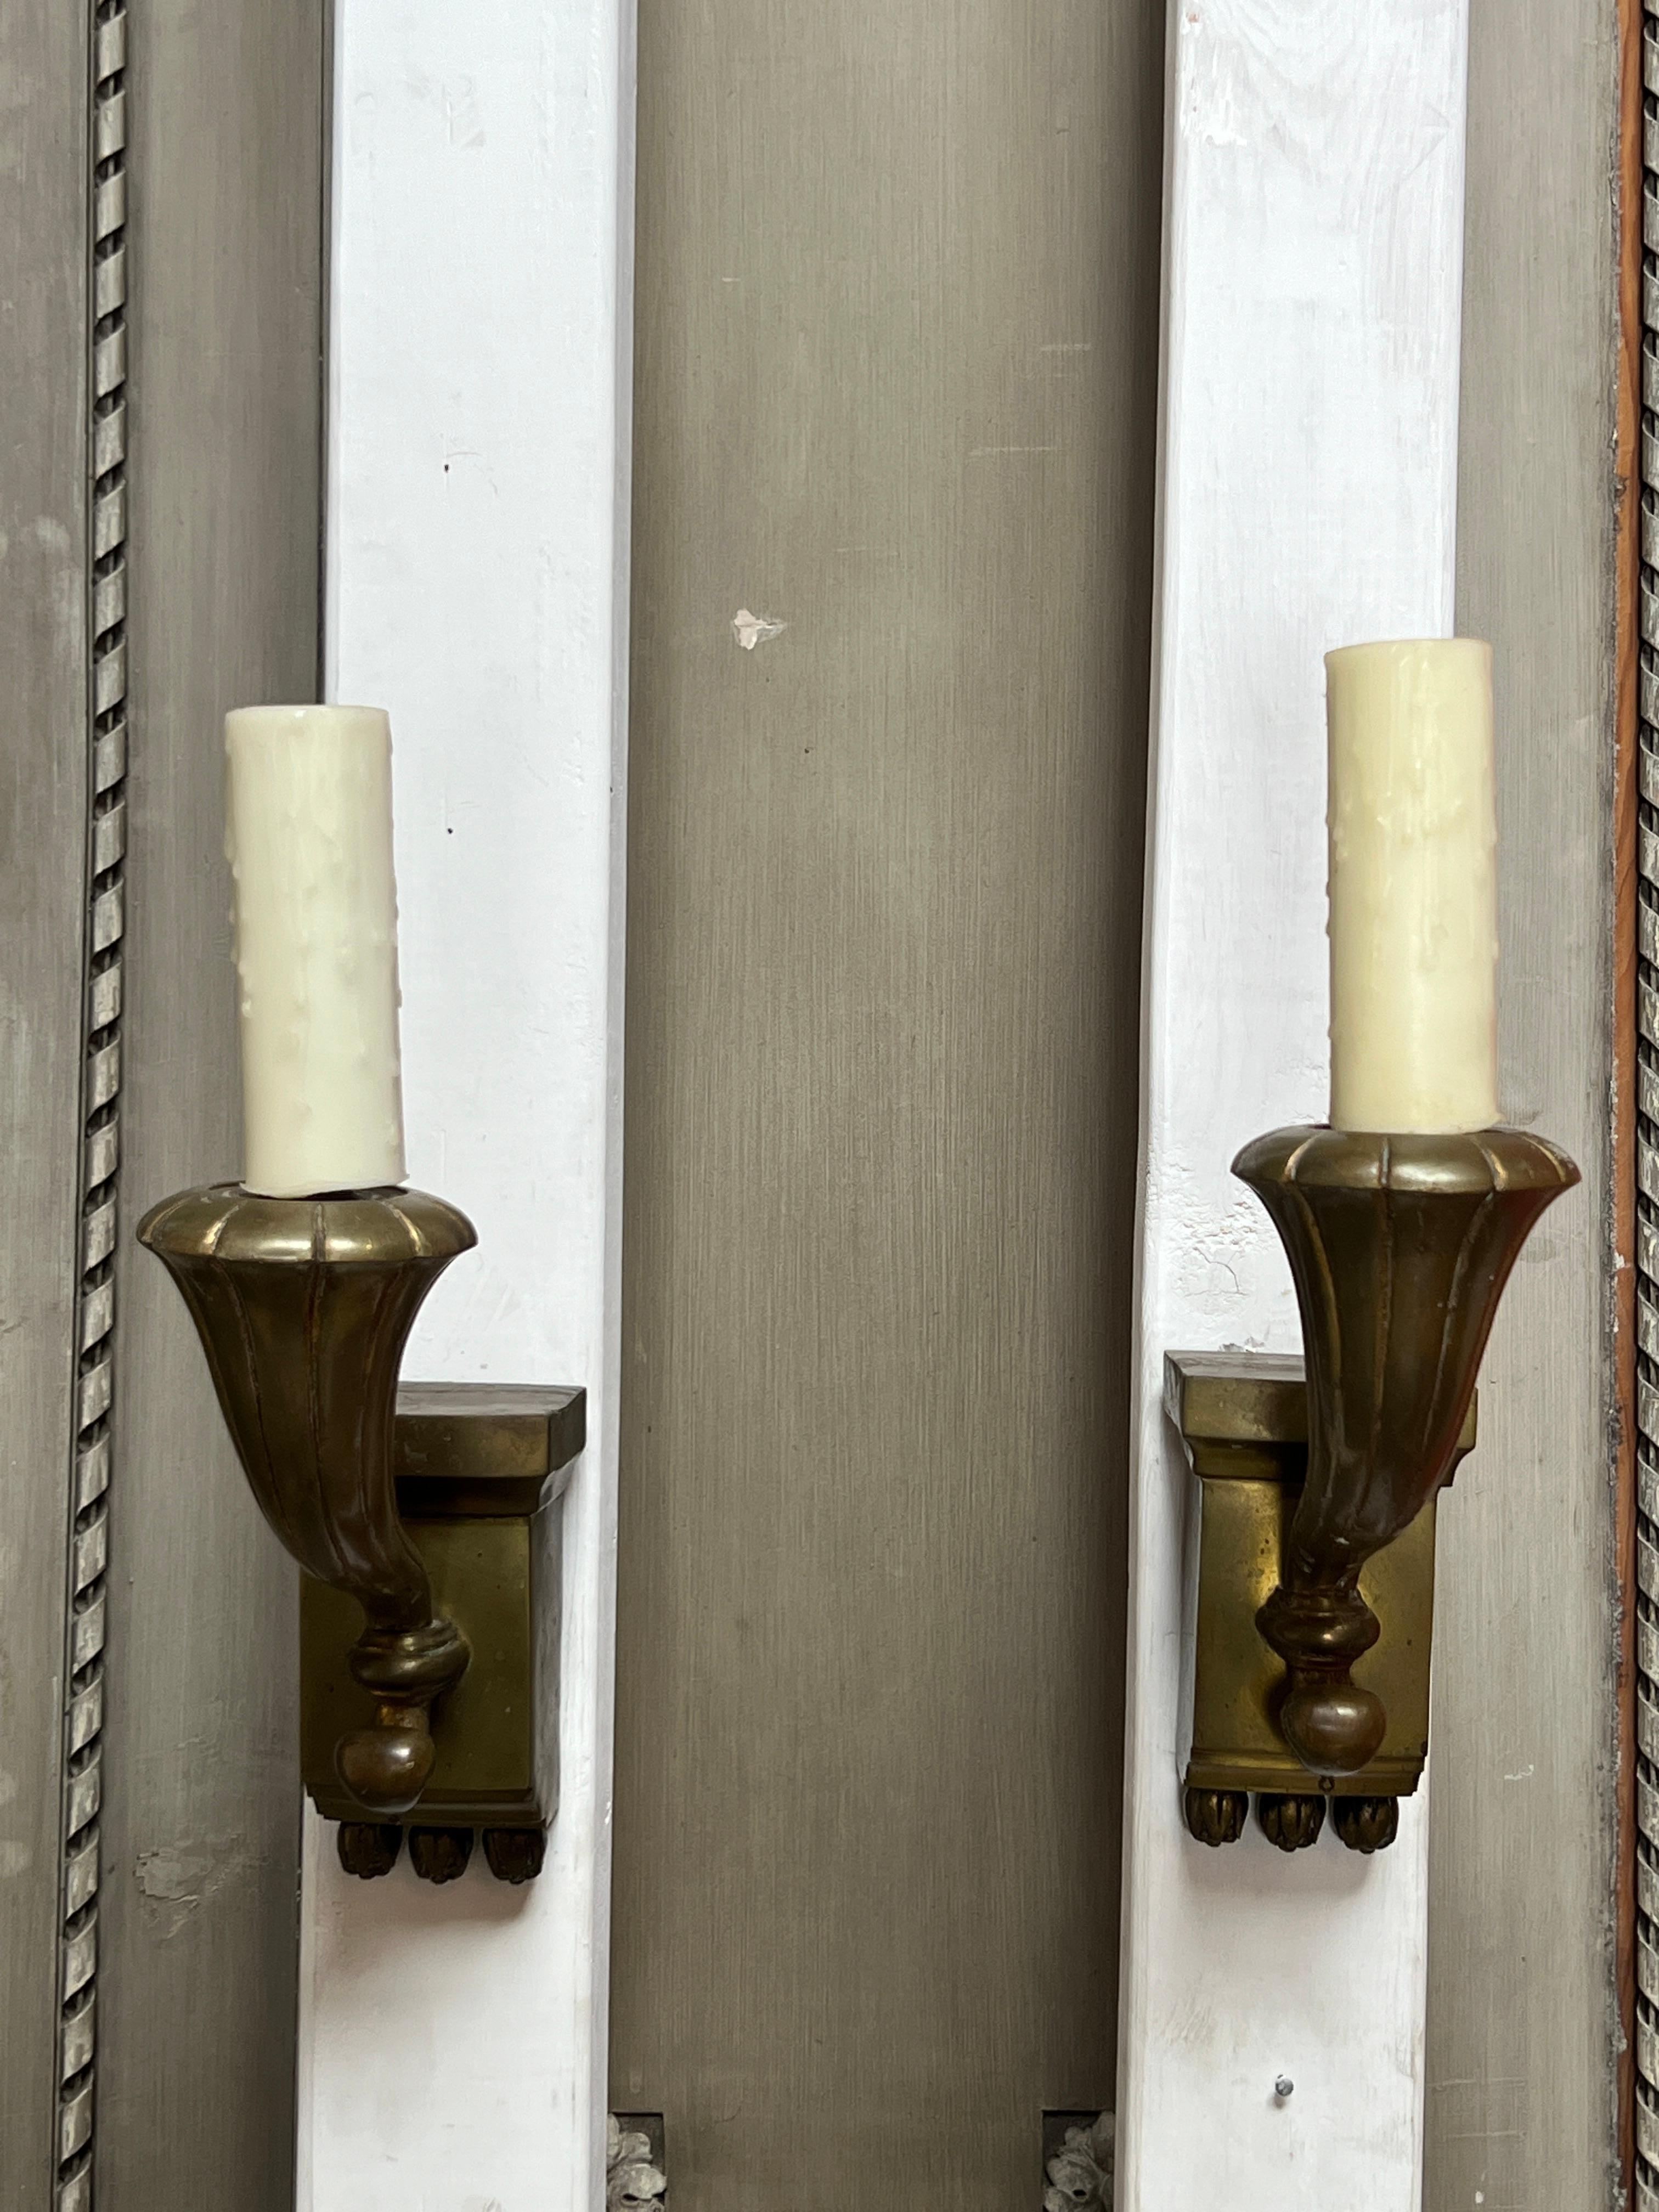 A pair of French Bronze single arm sconces, wall lights in a neoclassical style or Hollywood regency.  The arms are are a stylized cornucopias.  
These large scaled sconces are very decorative and bold.  